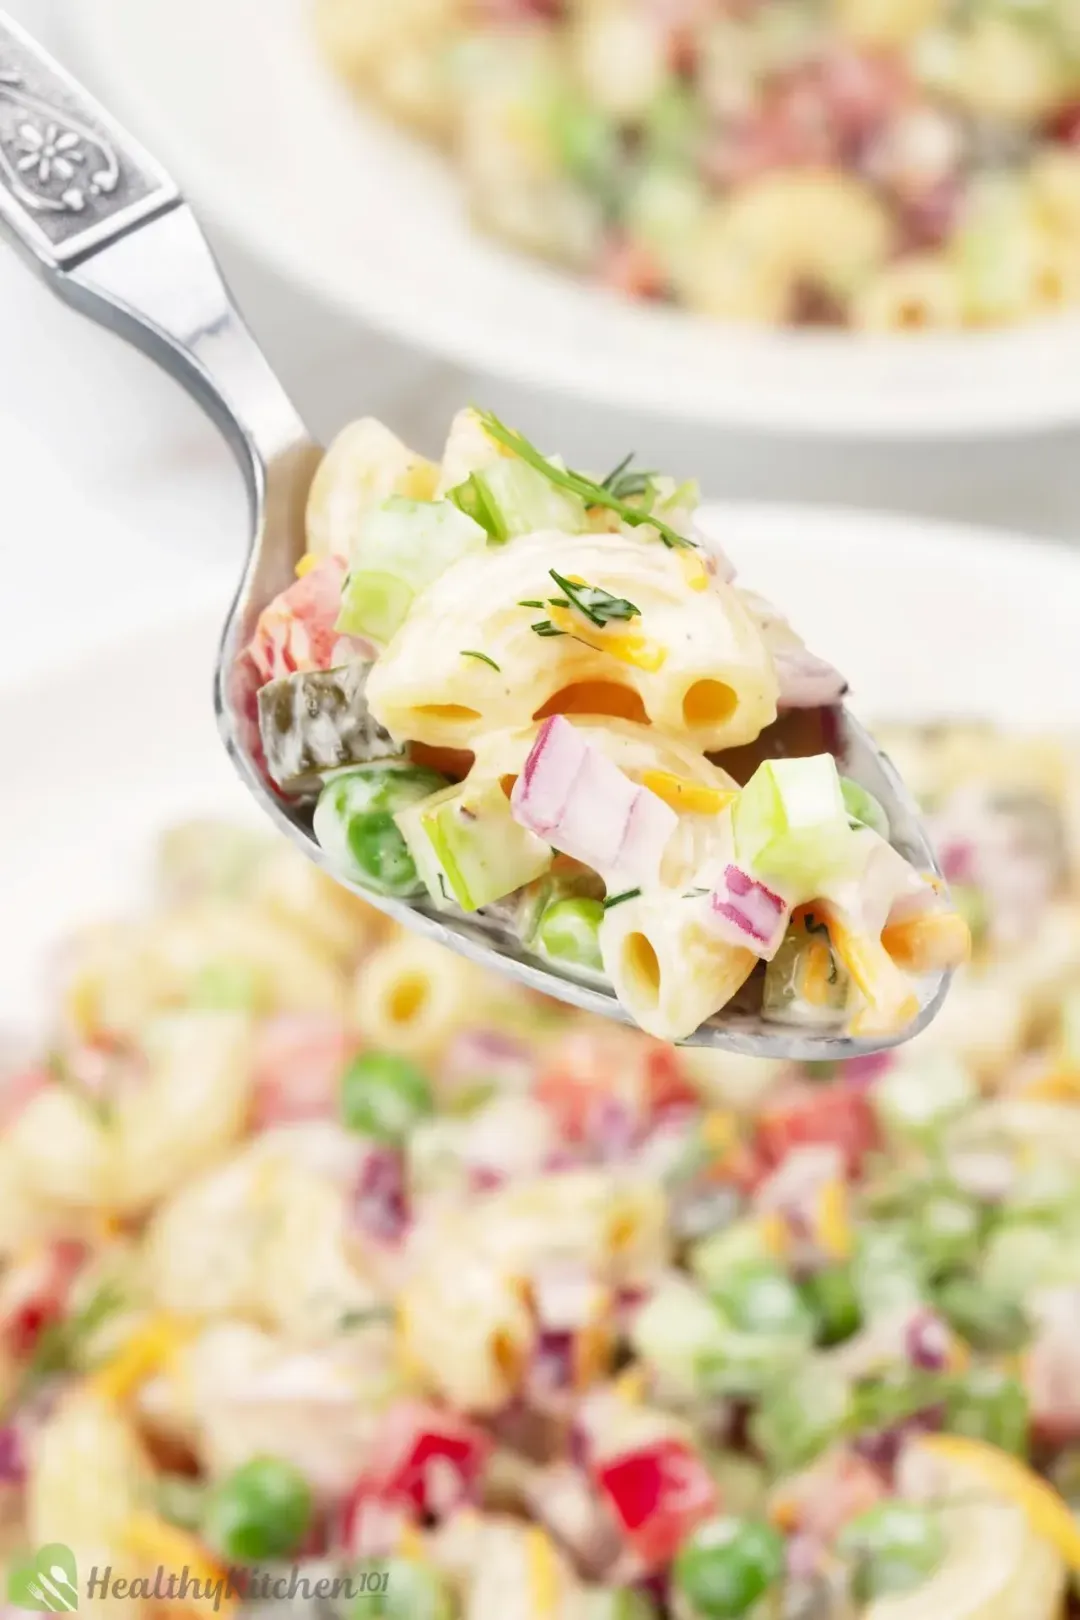 A spoon of macaroni salad with peas and red onion pieces in creamy dressing